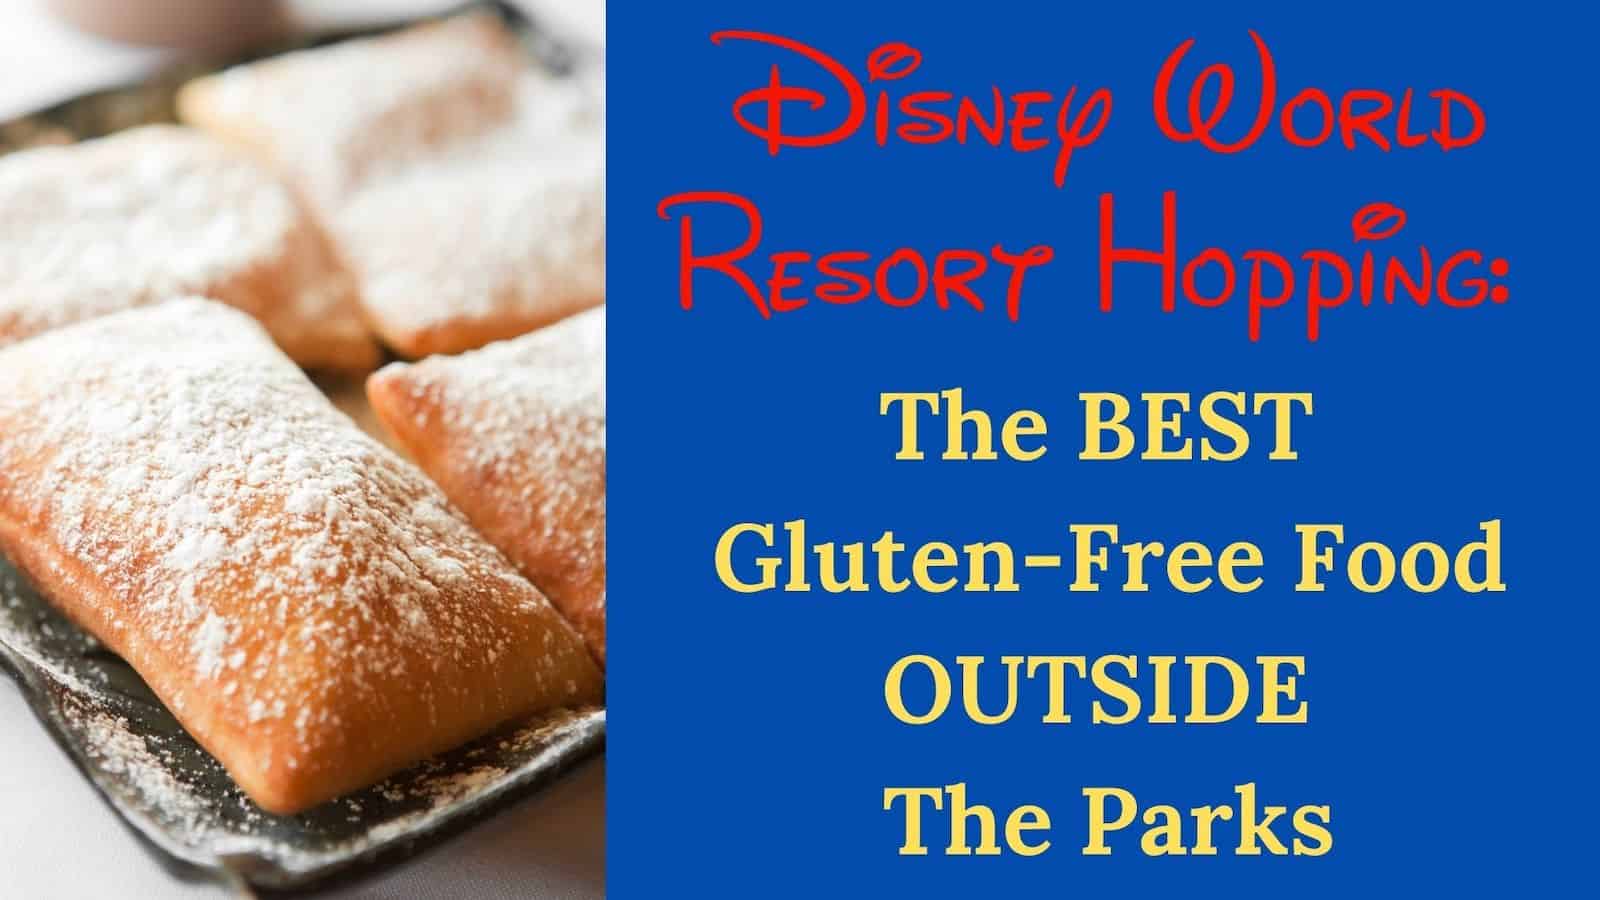 beignets on left, red and yellow text in a blue box on the right: Disney World Park Hopping: The BEST Gluten-Free Food OUTSIDE The Parks